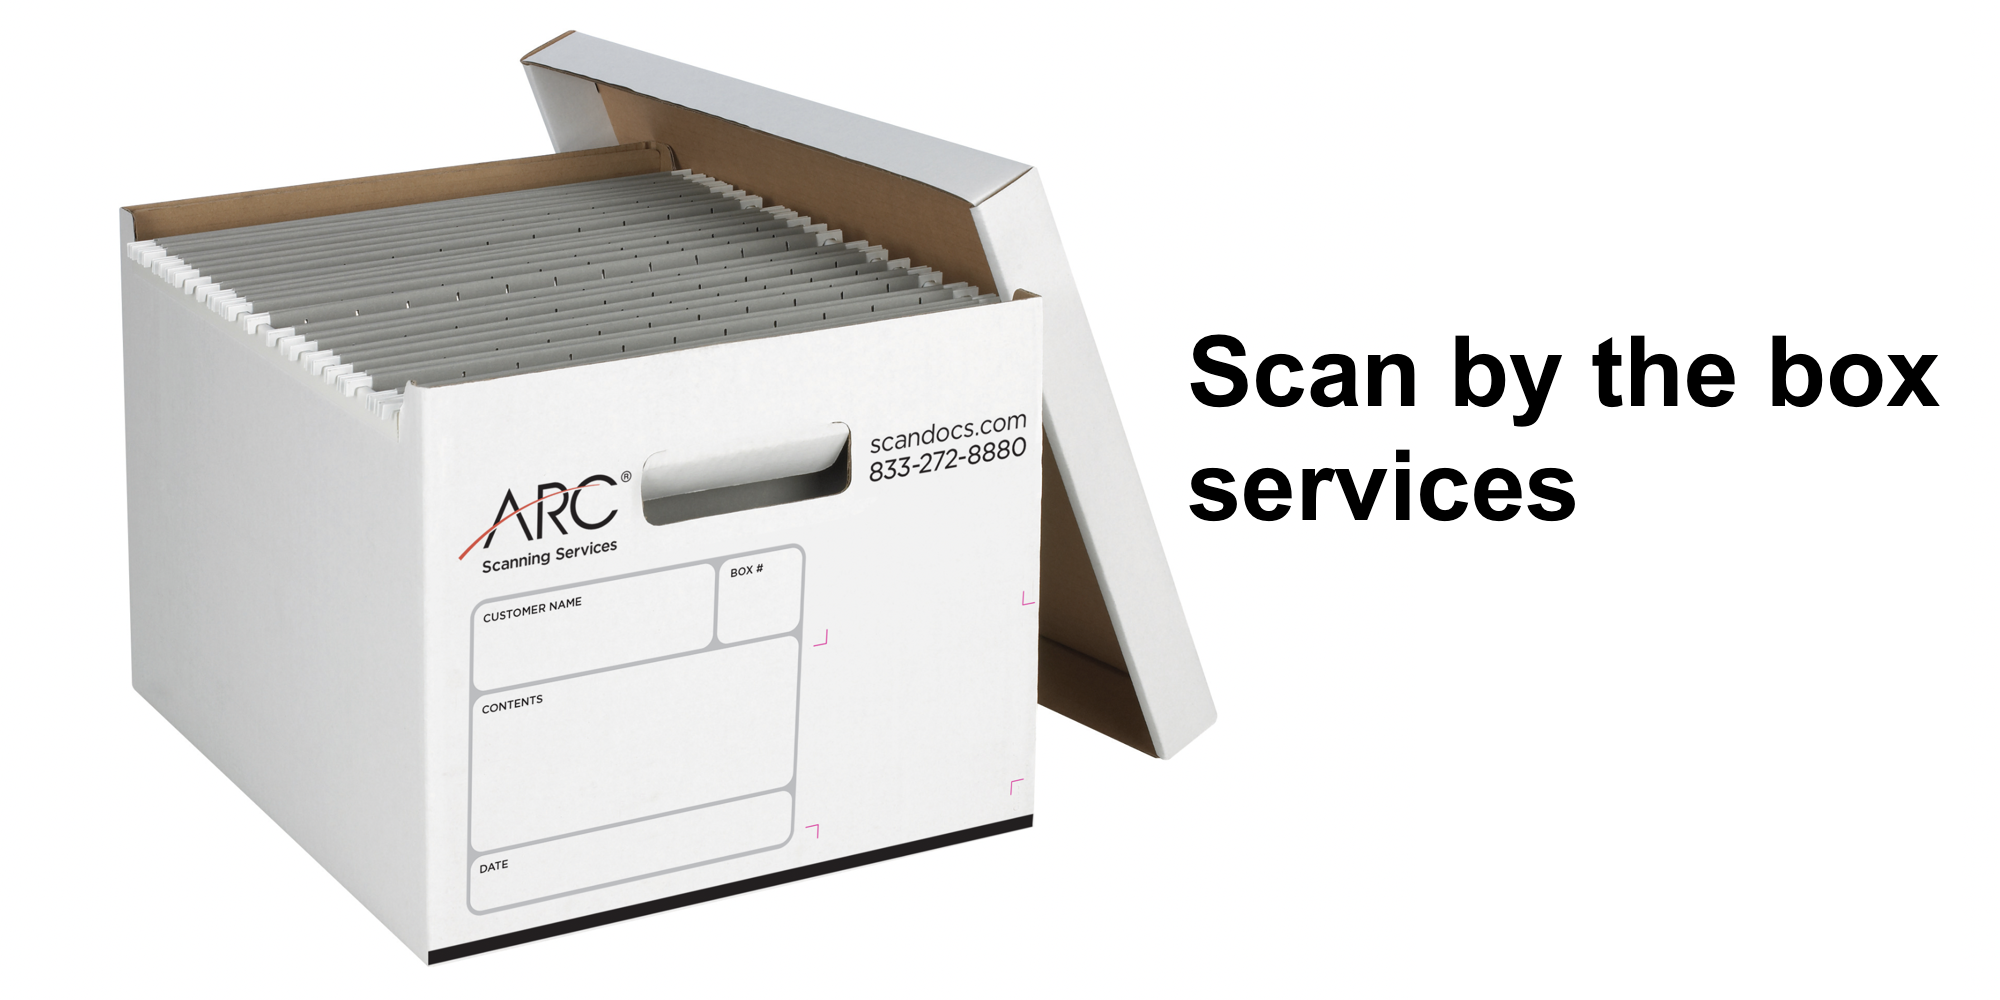 ARC_scan by the box services